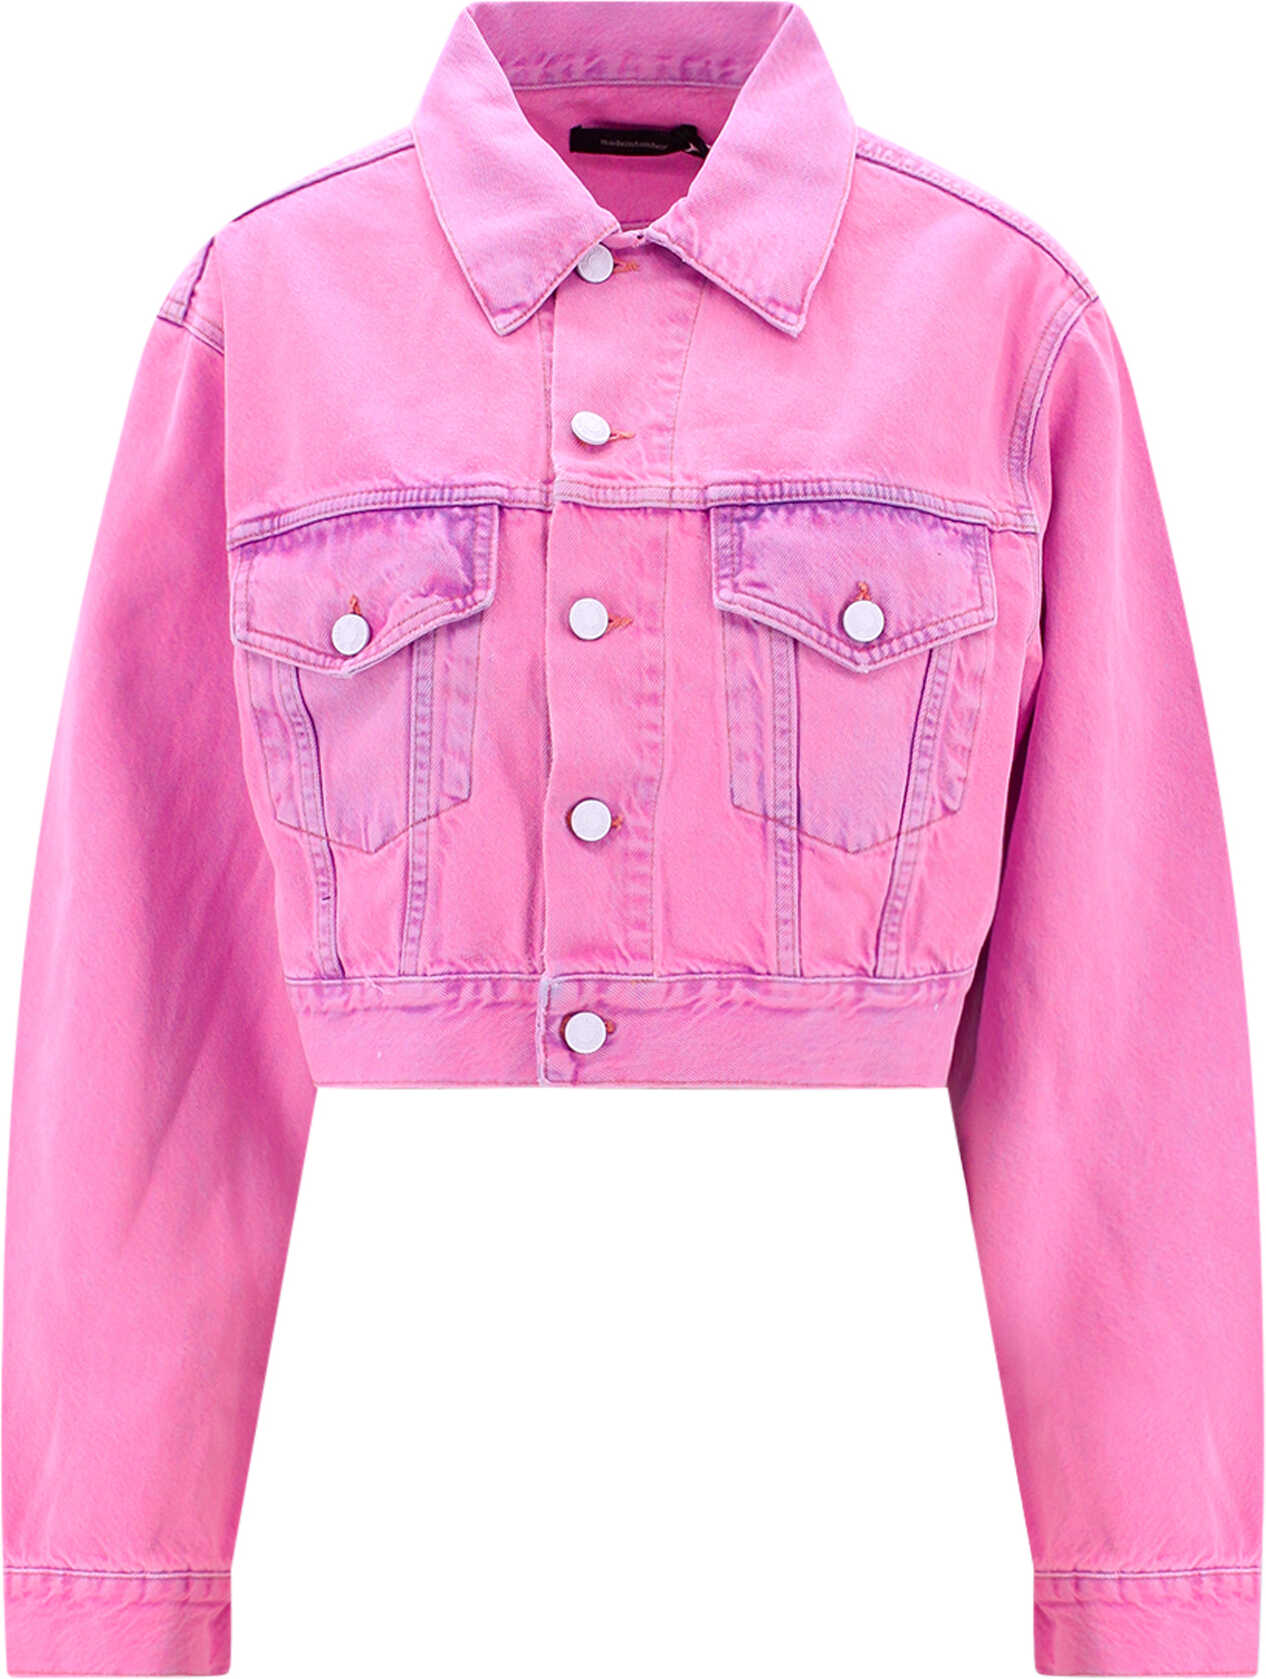 MADE IN TOMBOY Jacket Pink